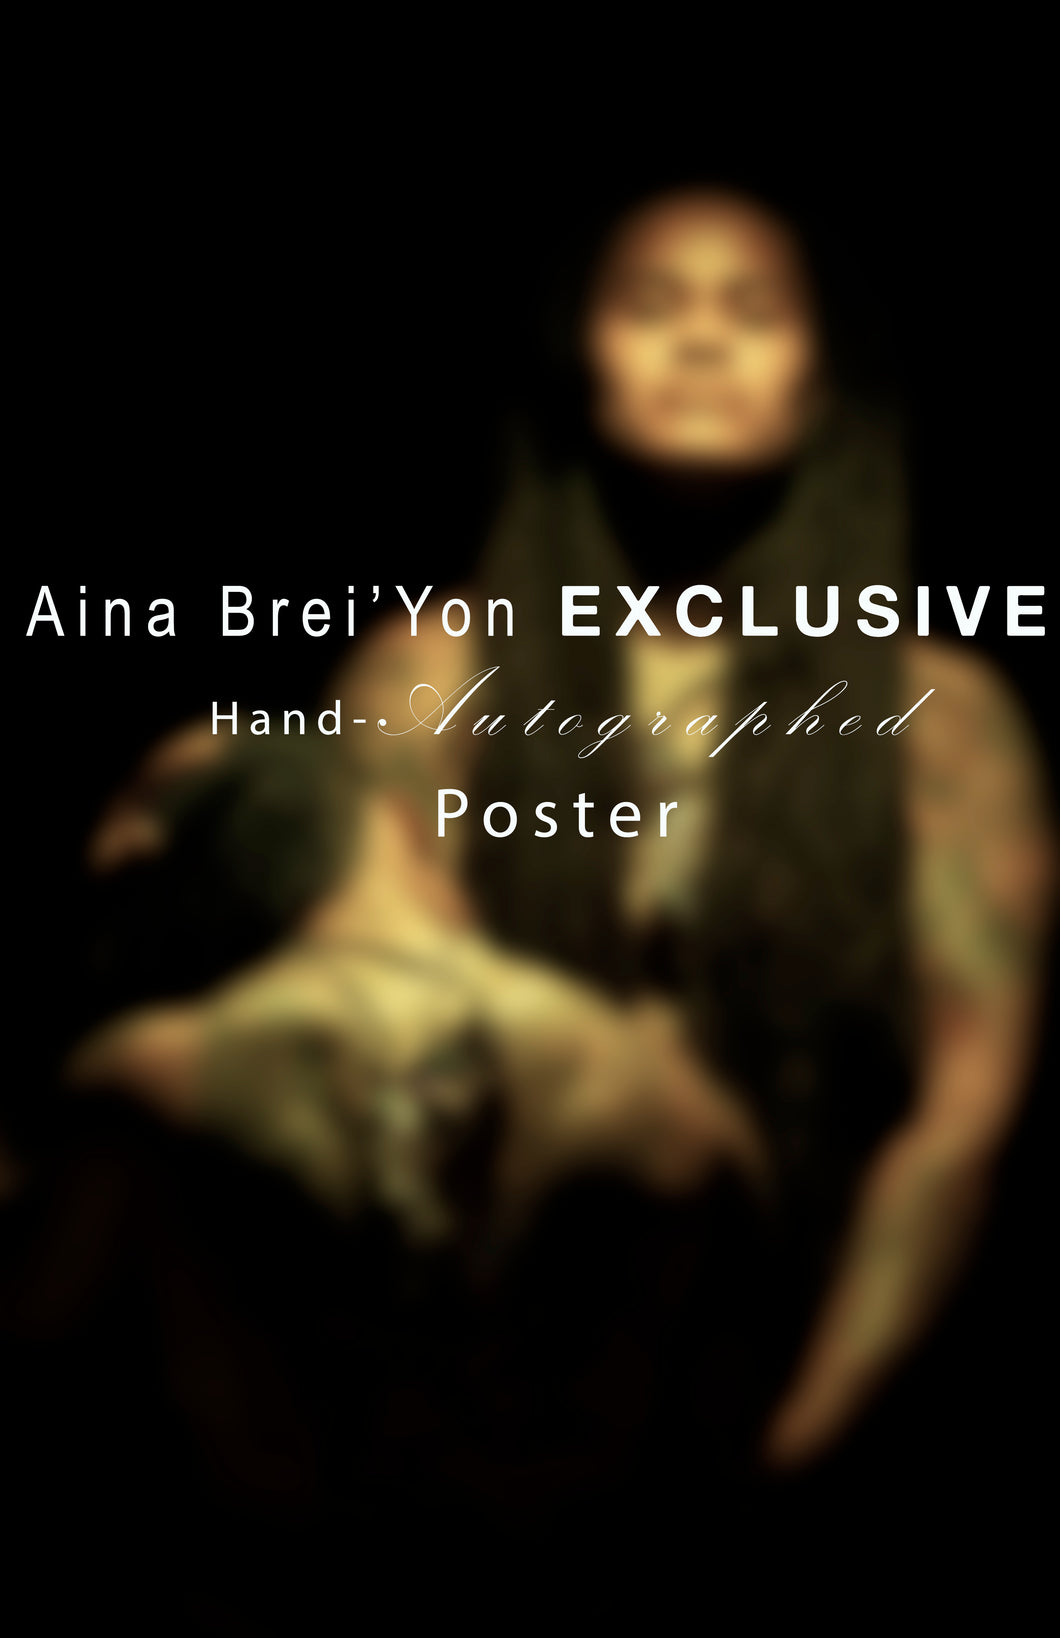 Aina Brei'Yon exclusive hand-autographed poster (The Rich Aisle)